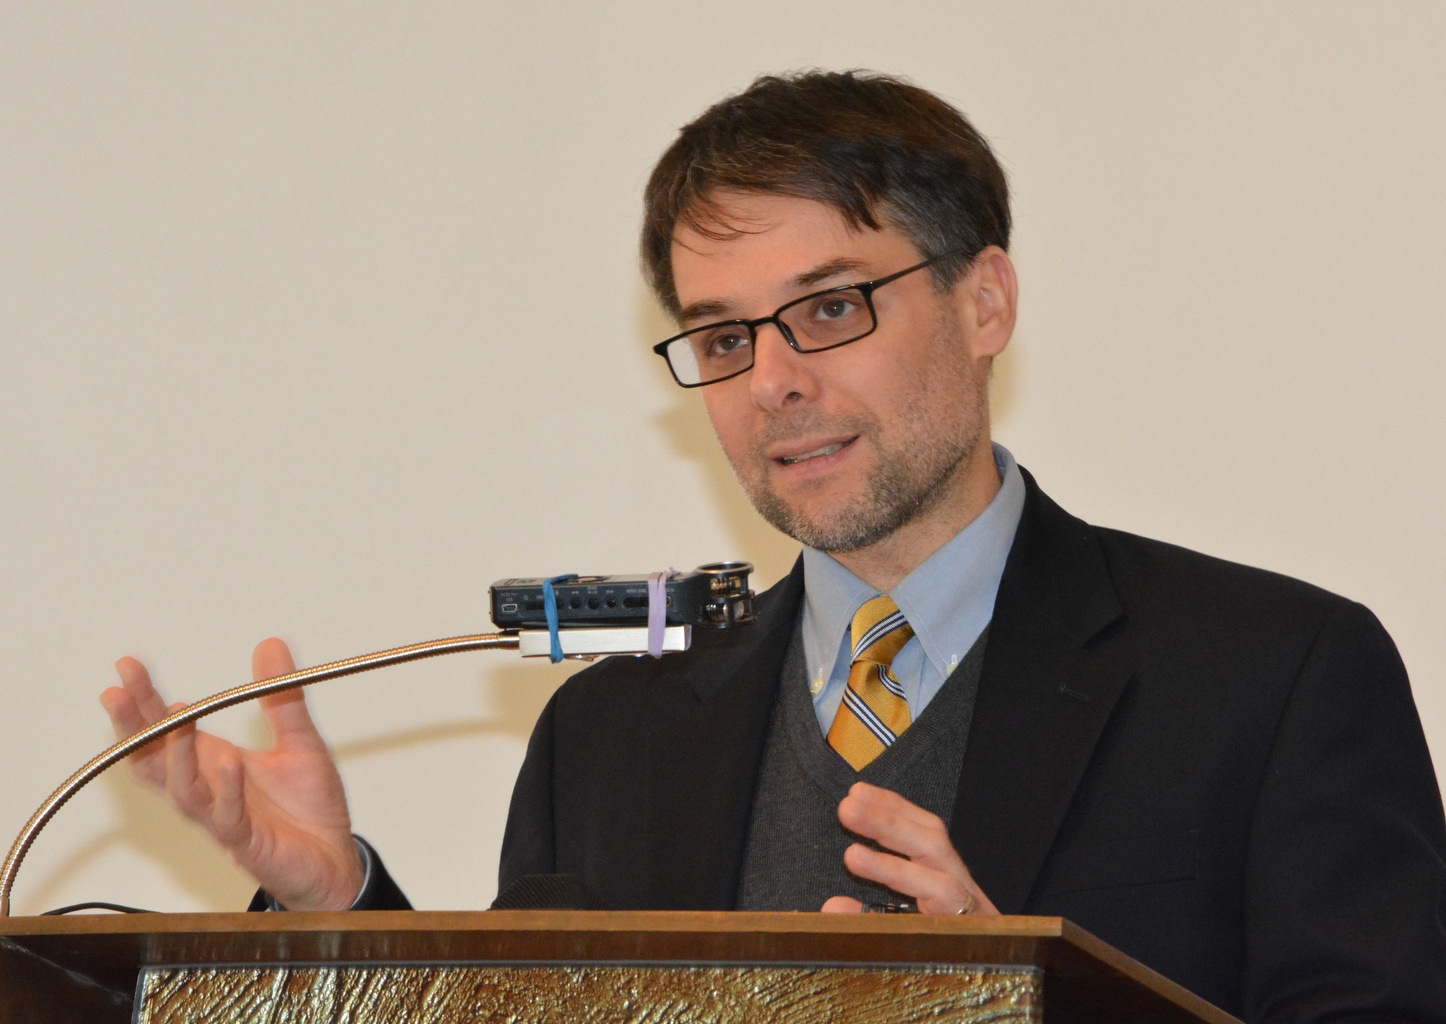 Massimo Faggioli delivers the annual Anthony Jordan Lecture Series at Newman Theological College Feb. 28, 2015, in Edmonton, Alberta. (CNS/Glen Argan, Western Catholic Reporter)